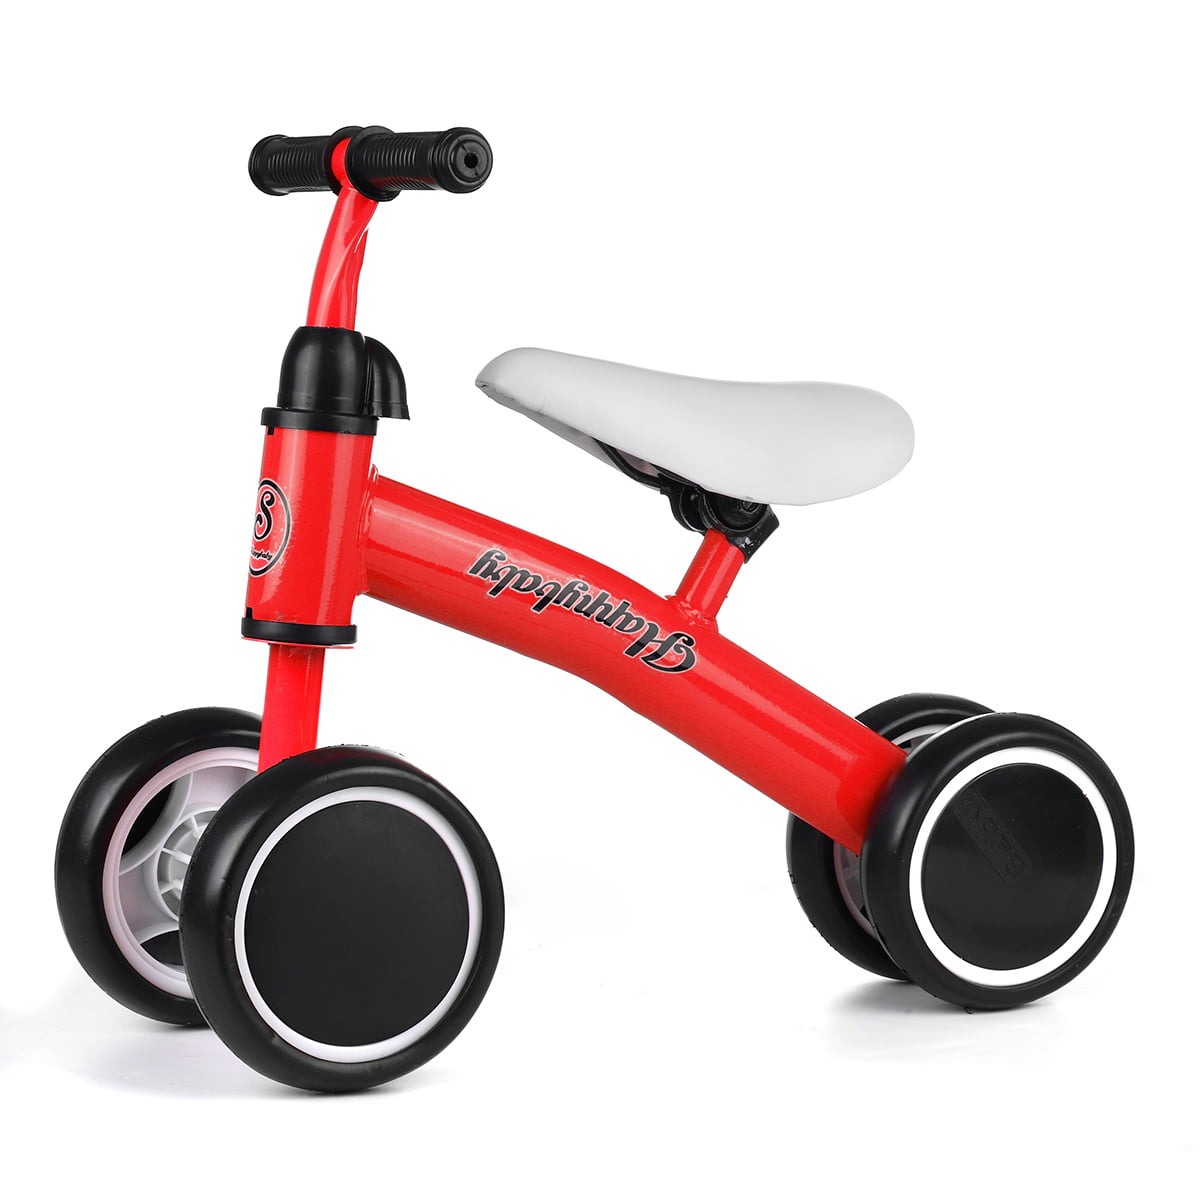 Baby Balance Bike Bicycle Mini Children Walker Toddler Toy Rides No-Pedal Colors 